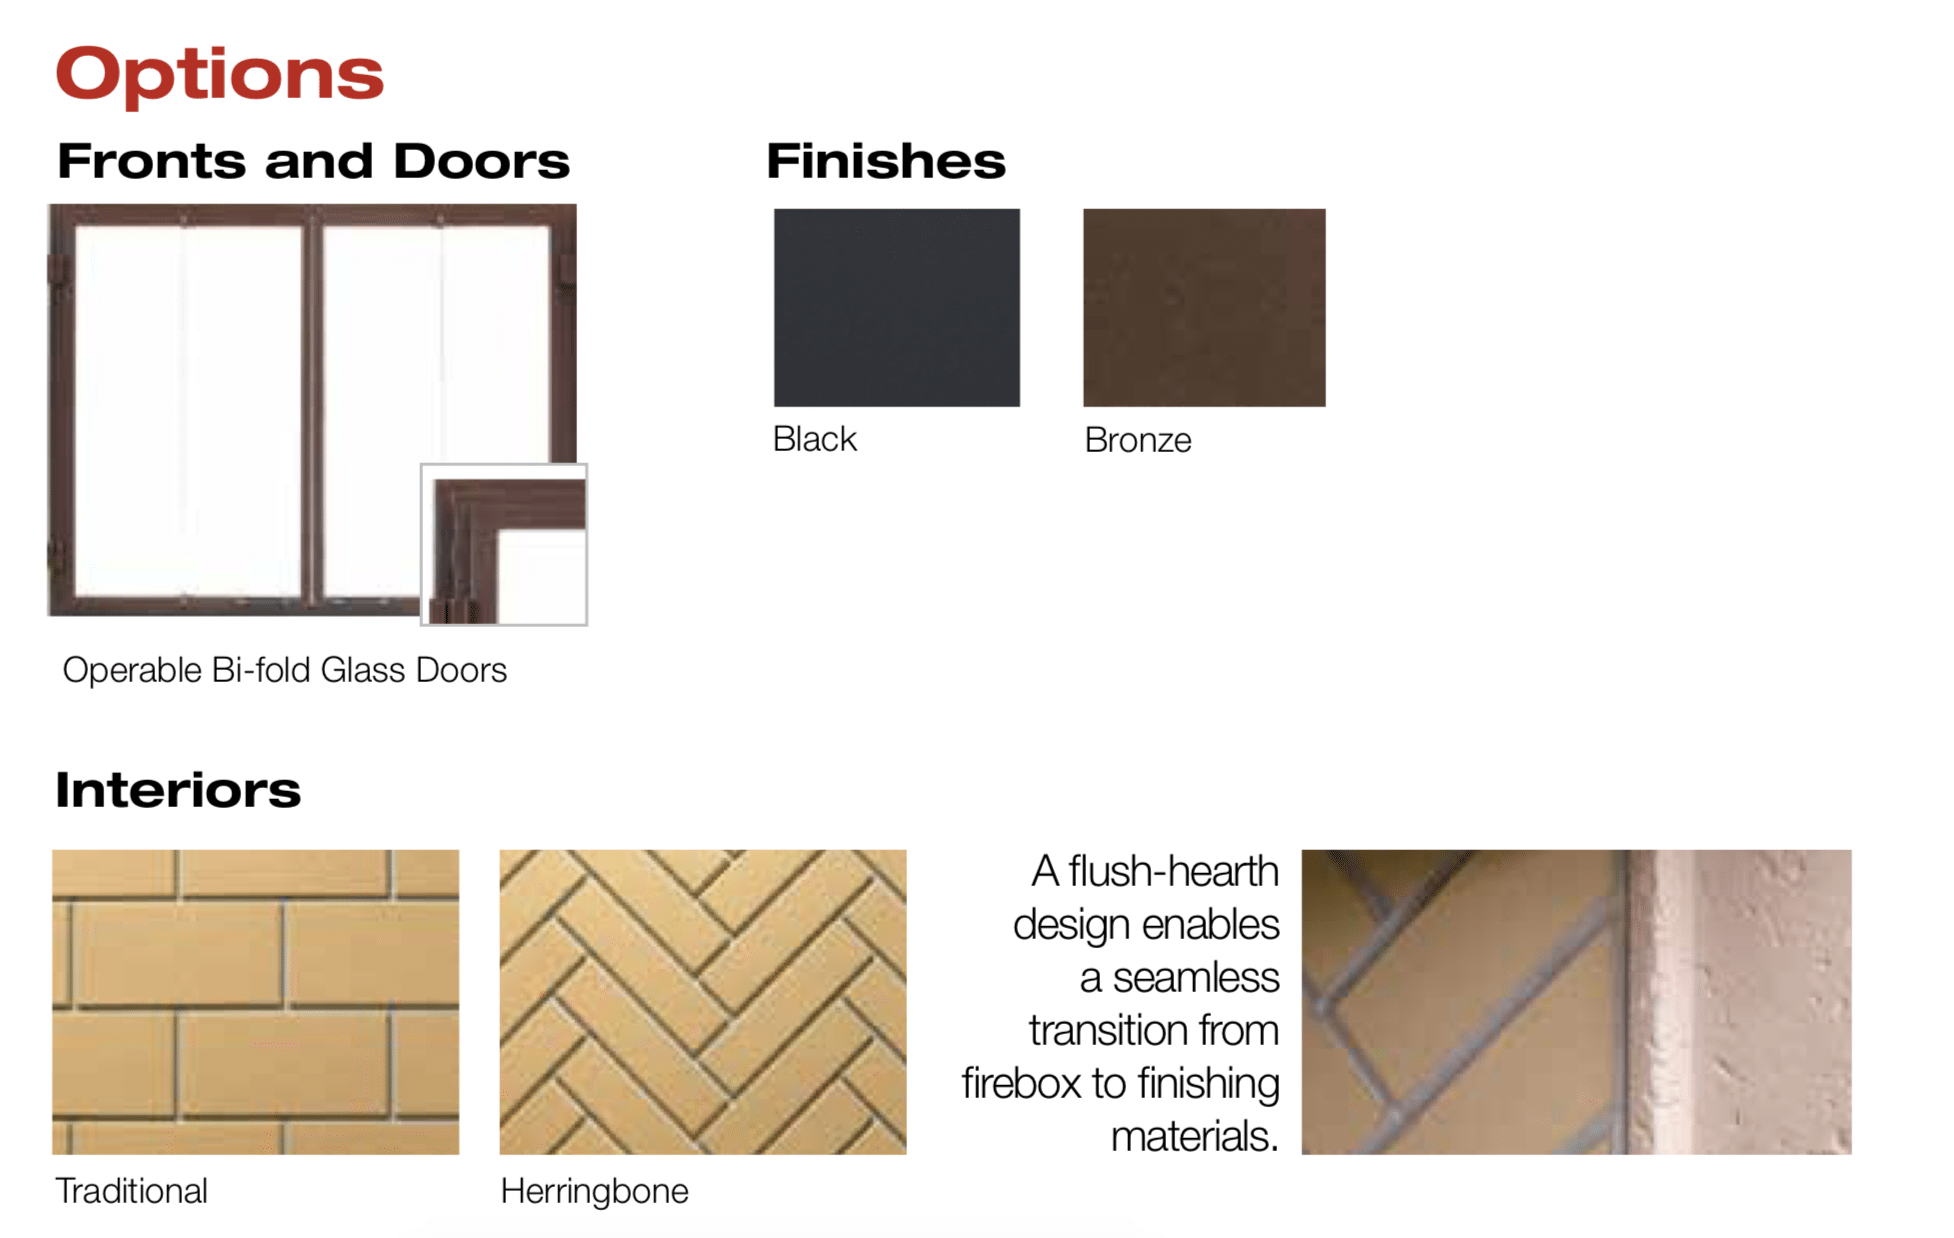 Infographic of fireplace options: Fronts & Doors, Finishes, Interiors